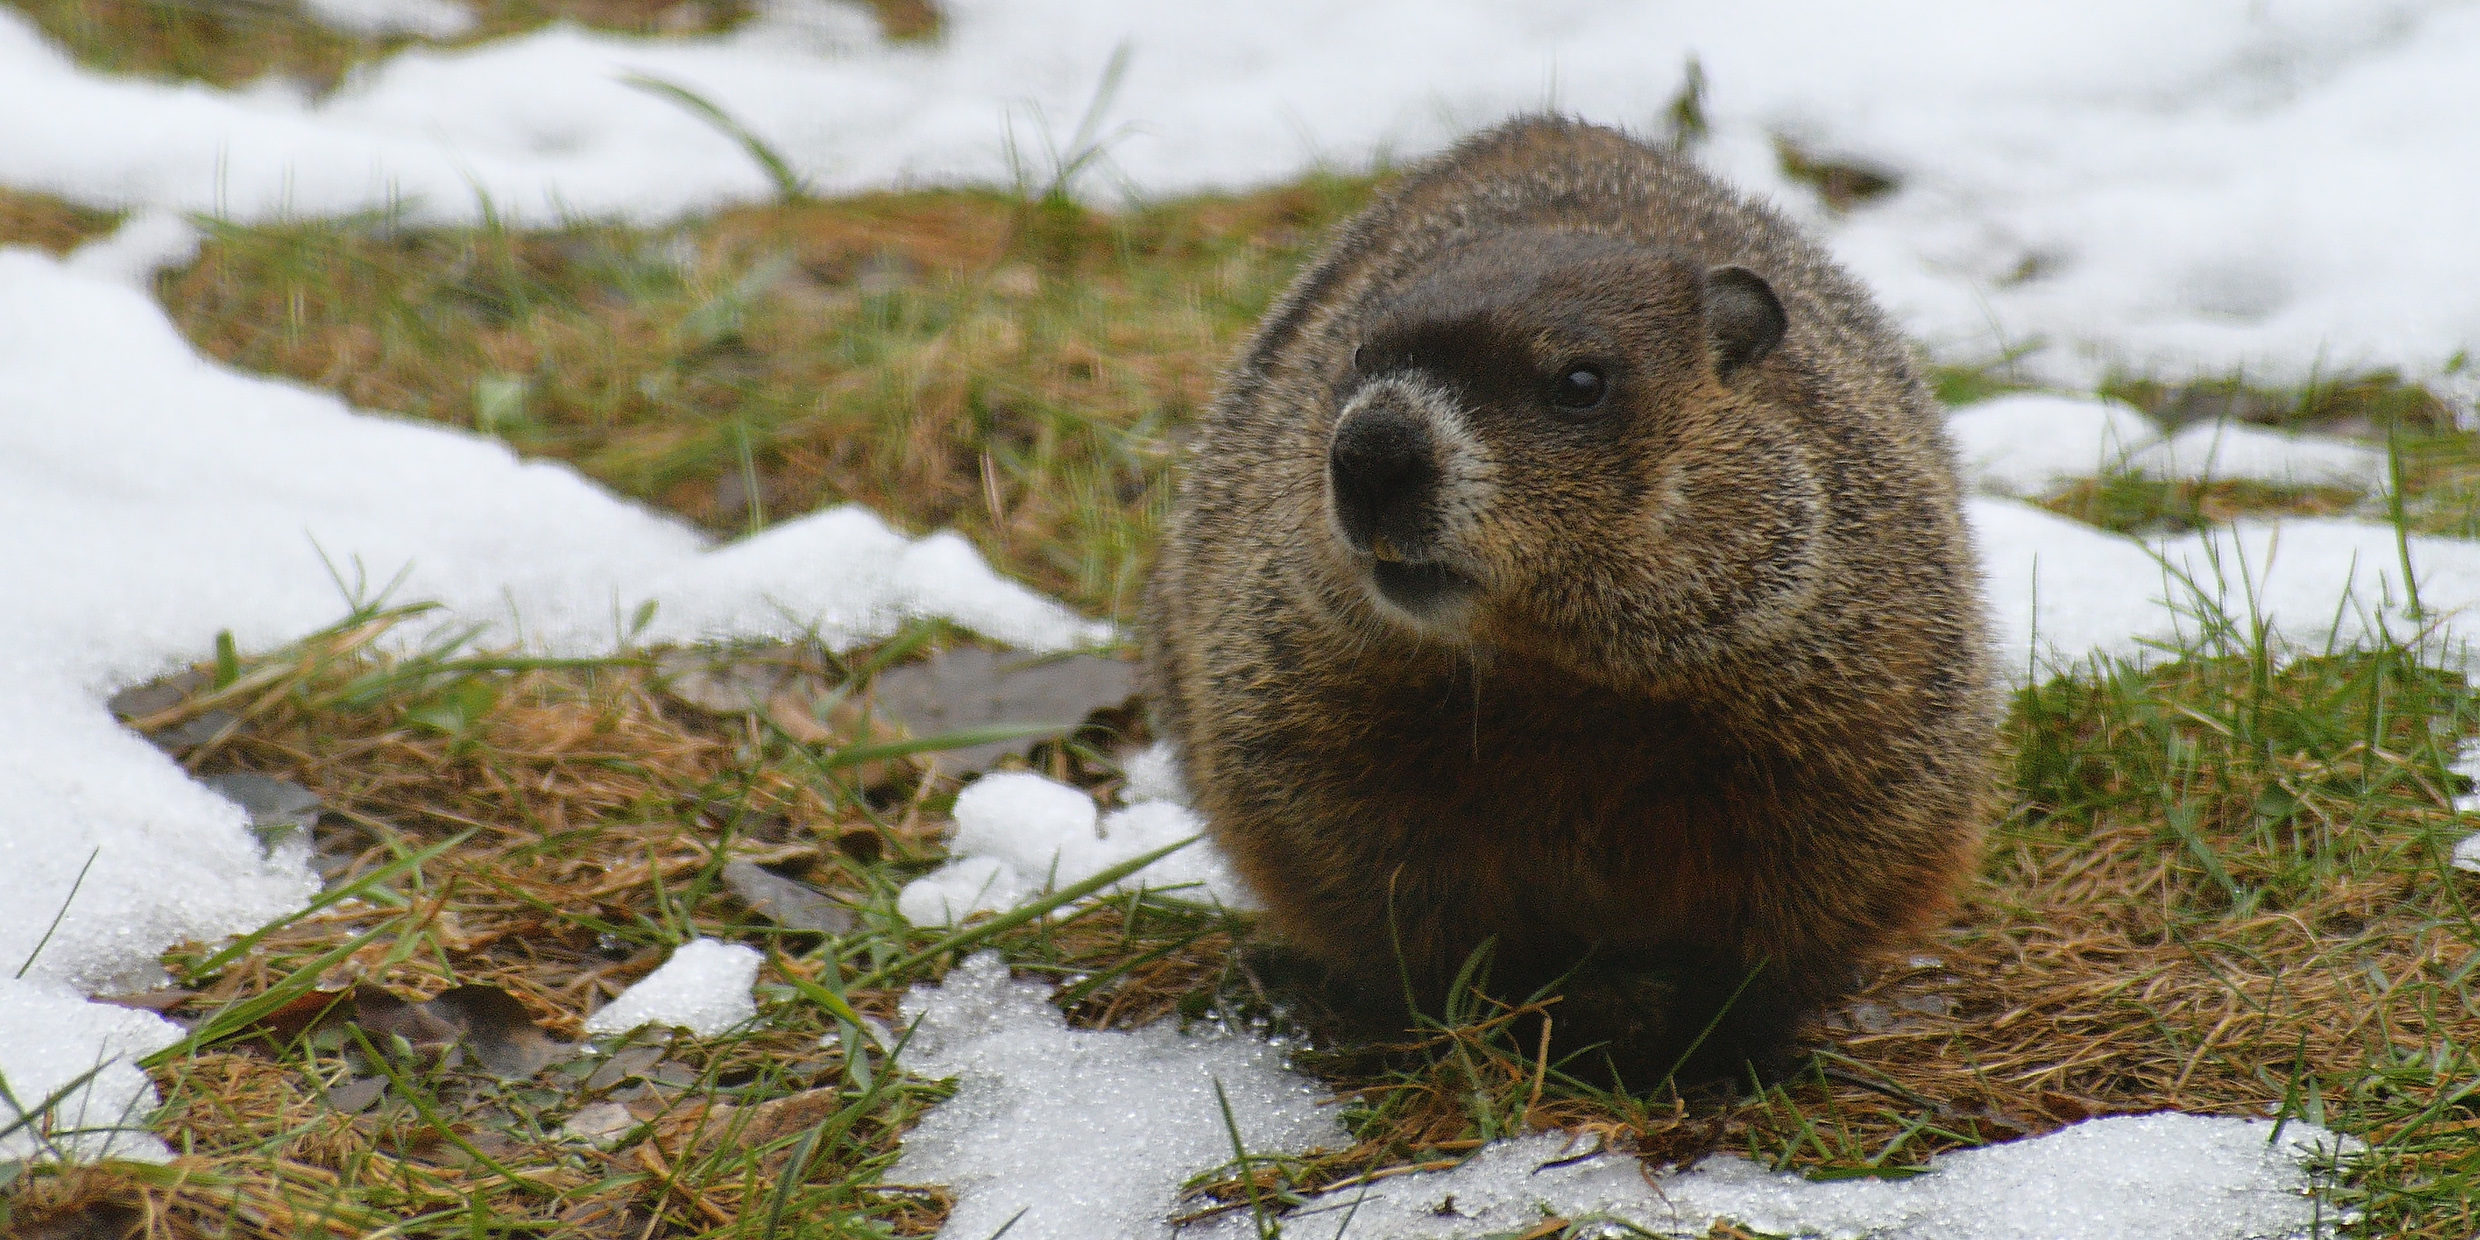 Image of a groundhog on snow-covered grass